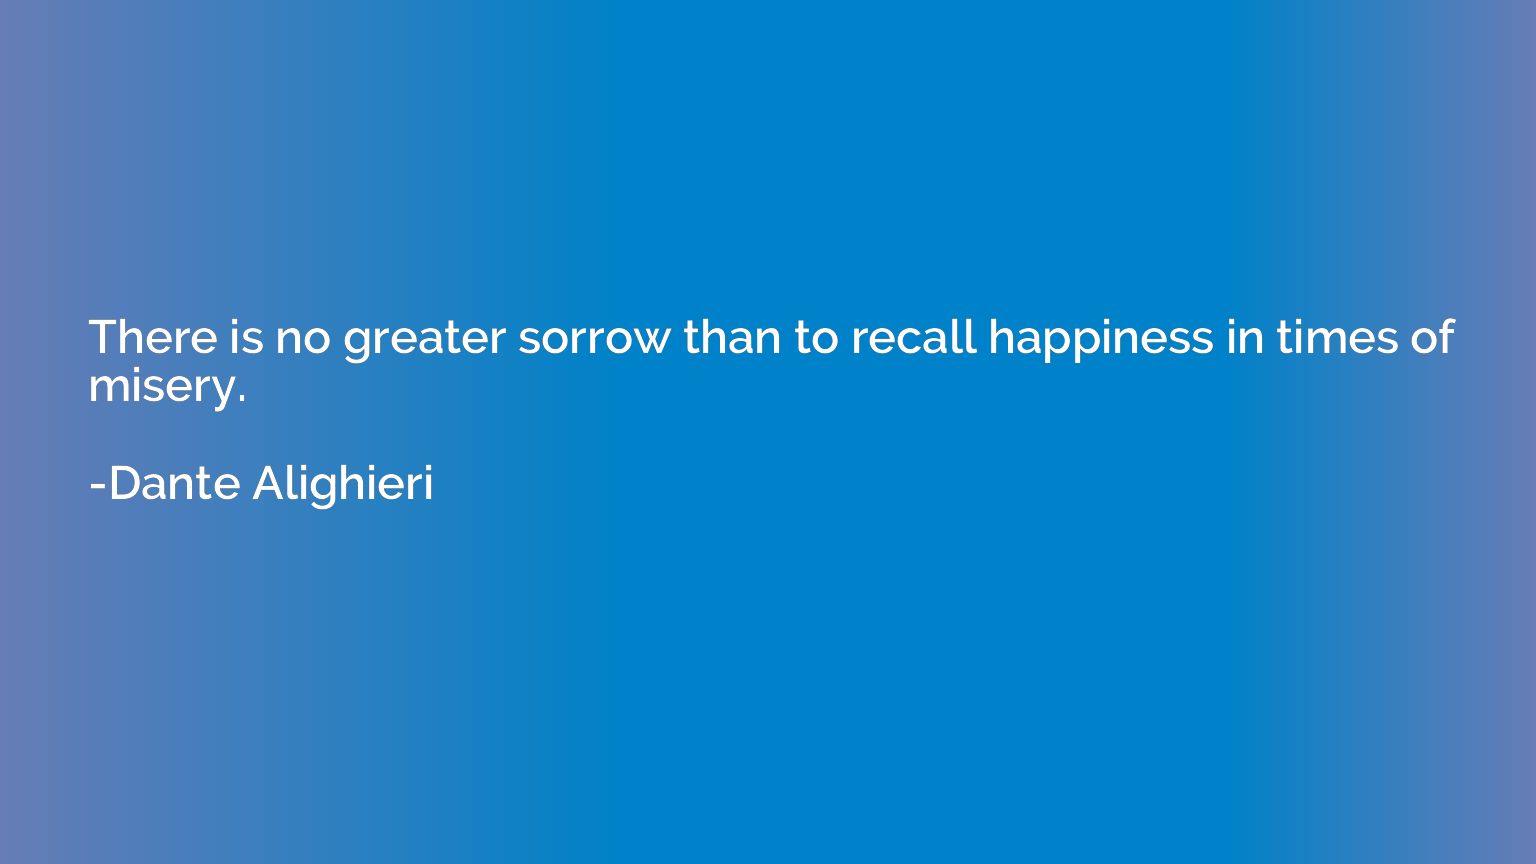 There is no greater sorrow than to recall happiness in times